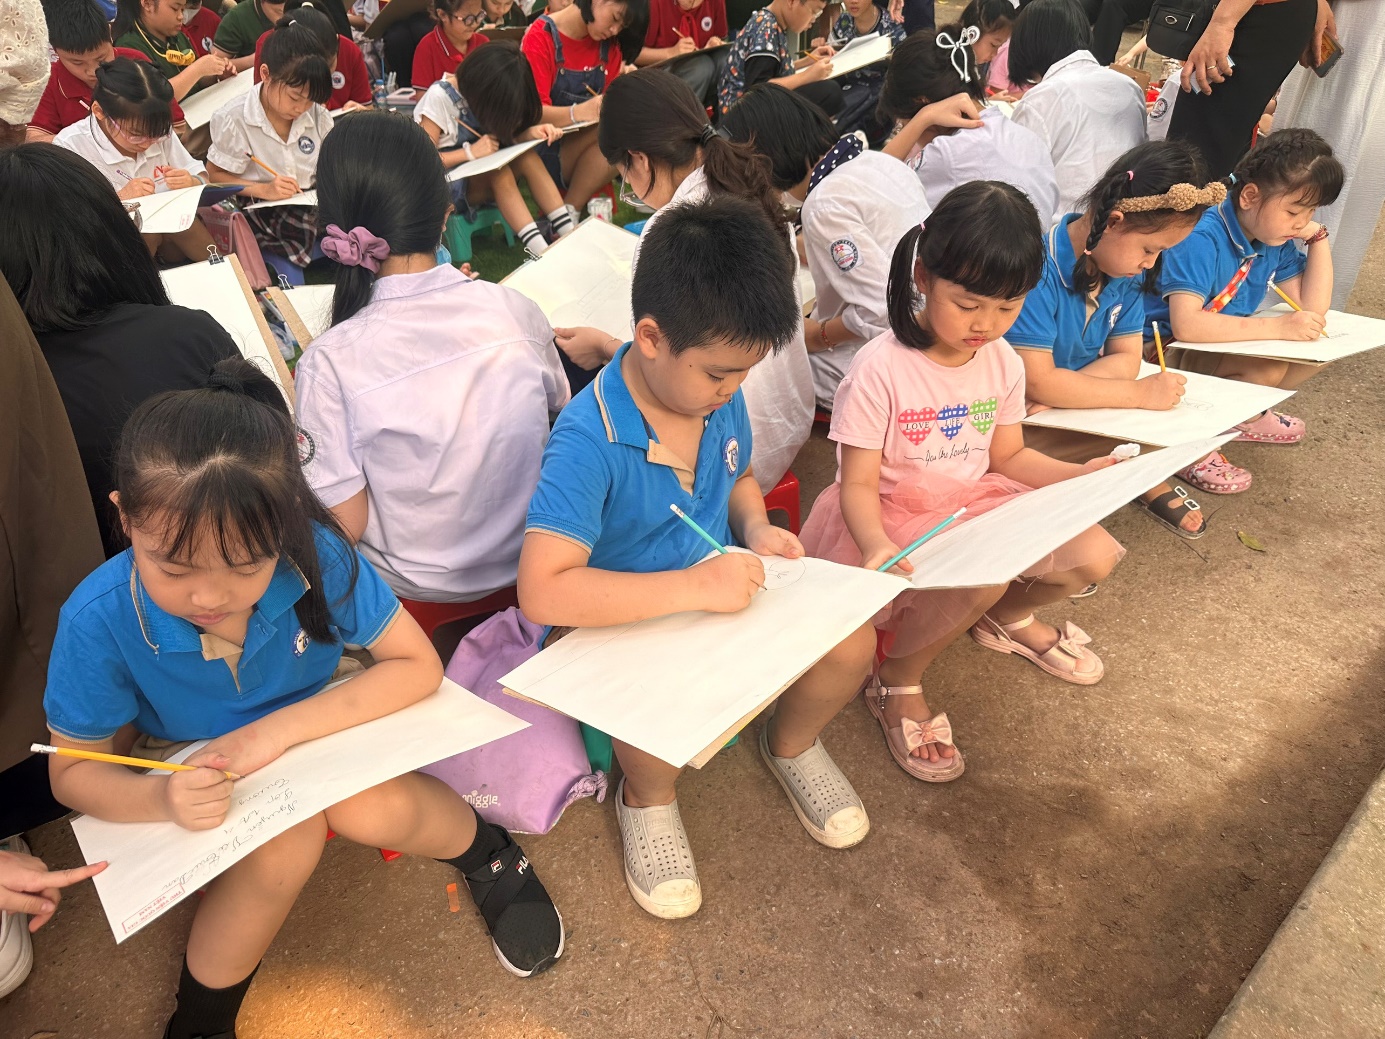 A group of children sitting on the ground writing on paper

Description automatically generated